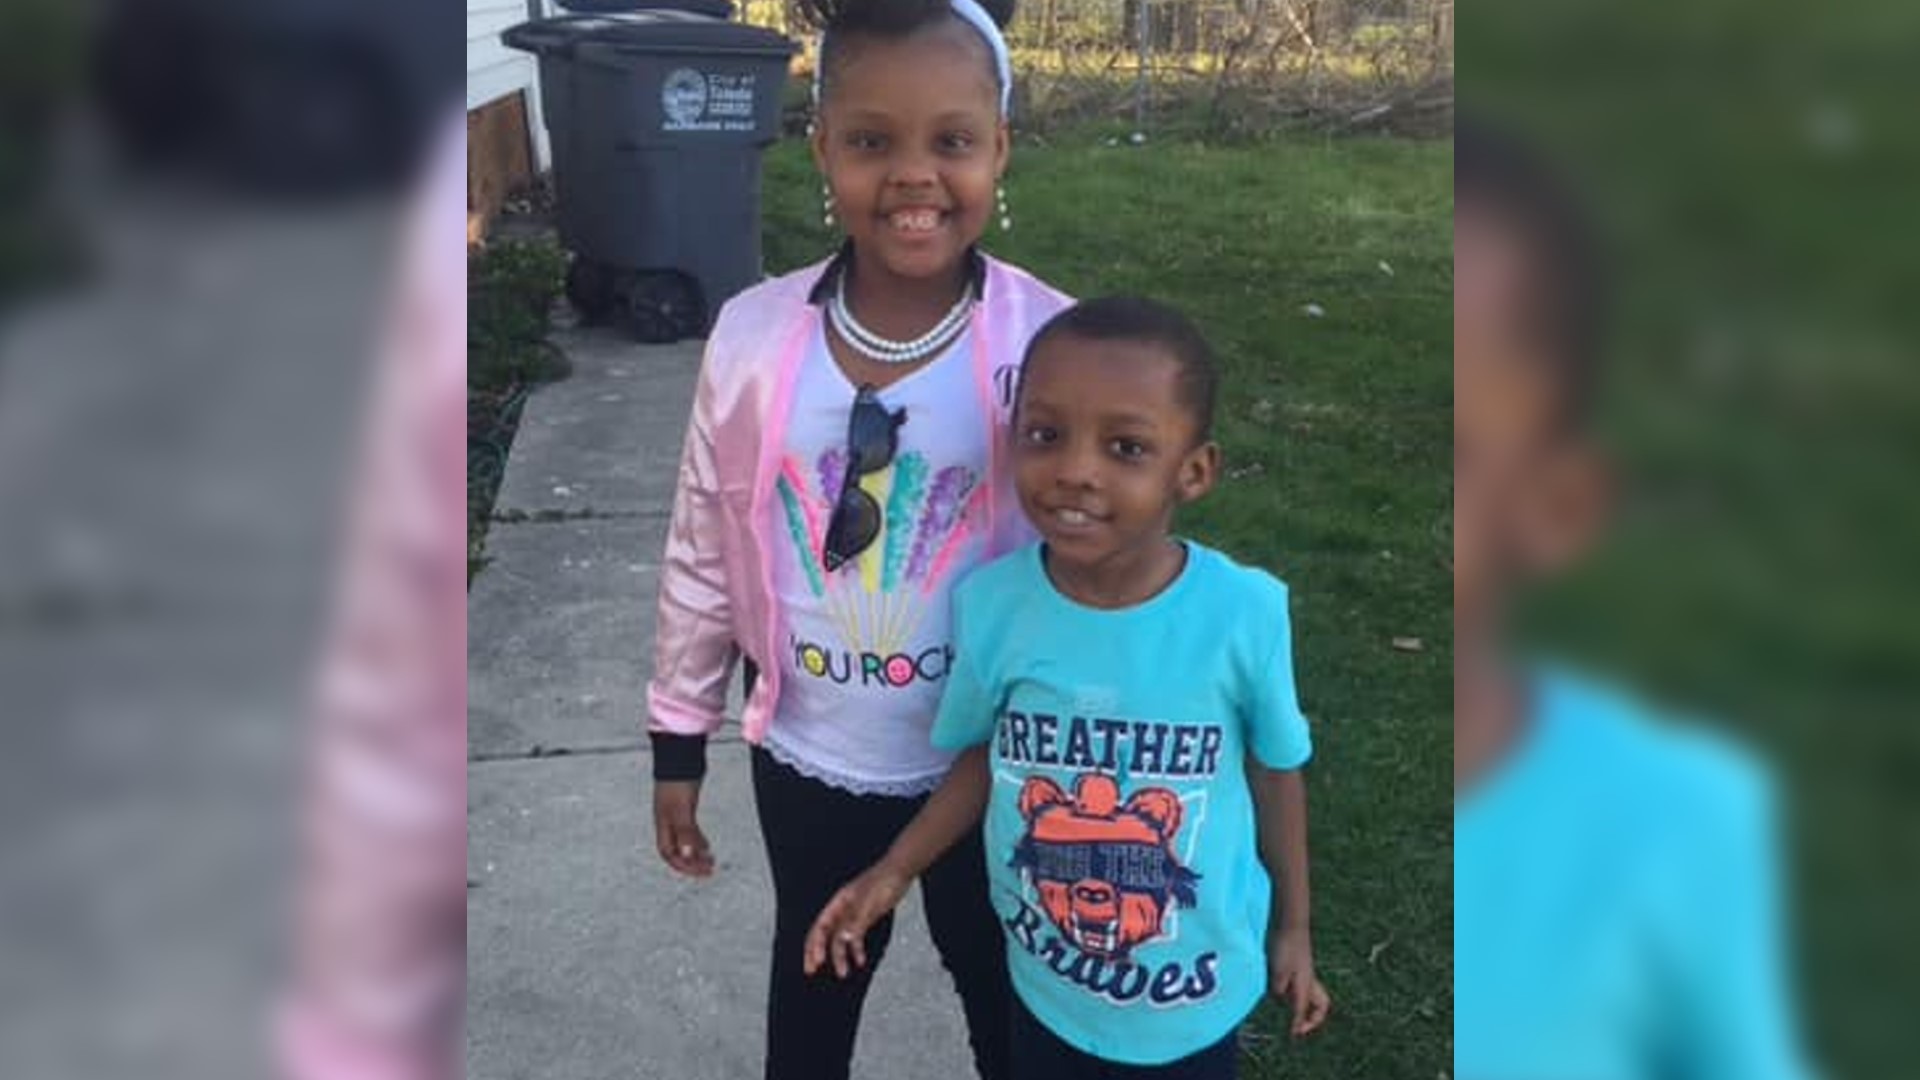 Three people were sent to the hospital with minor, non-life-threatening injuries. 9-year-old Amare Lockett was killed, the family confirmed Saturday to WTOL 11.